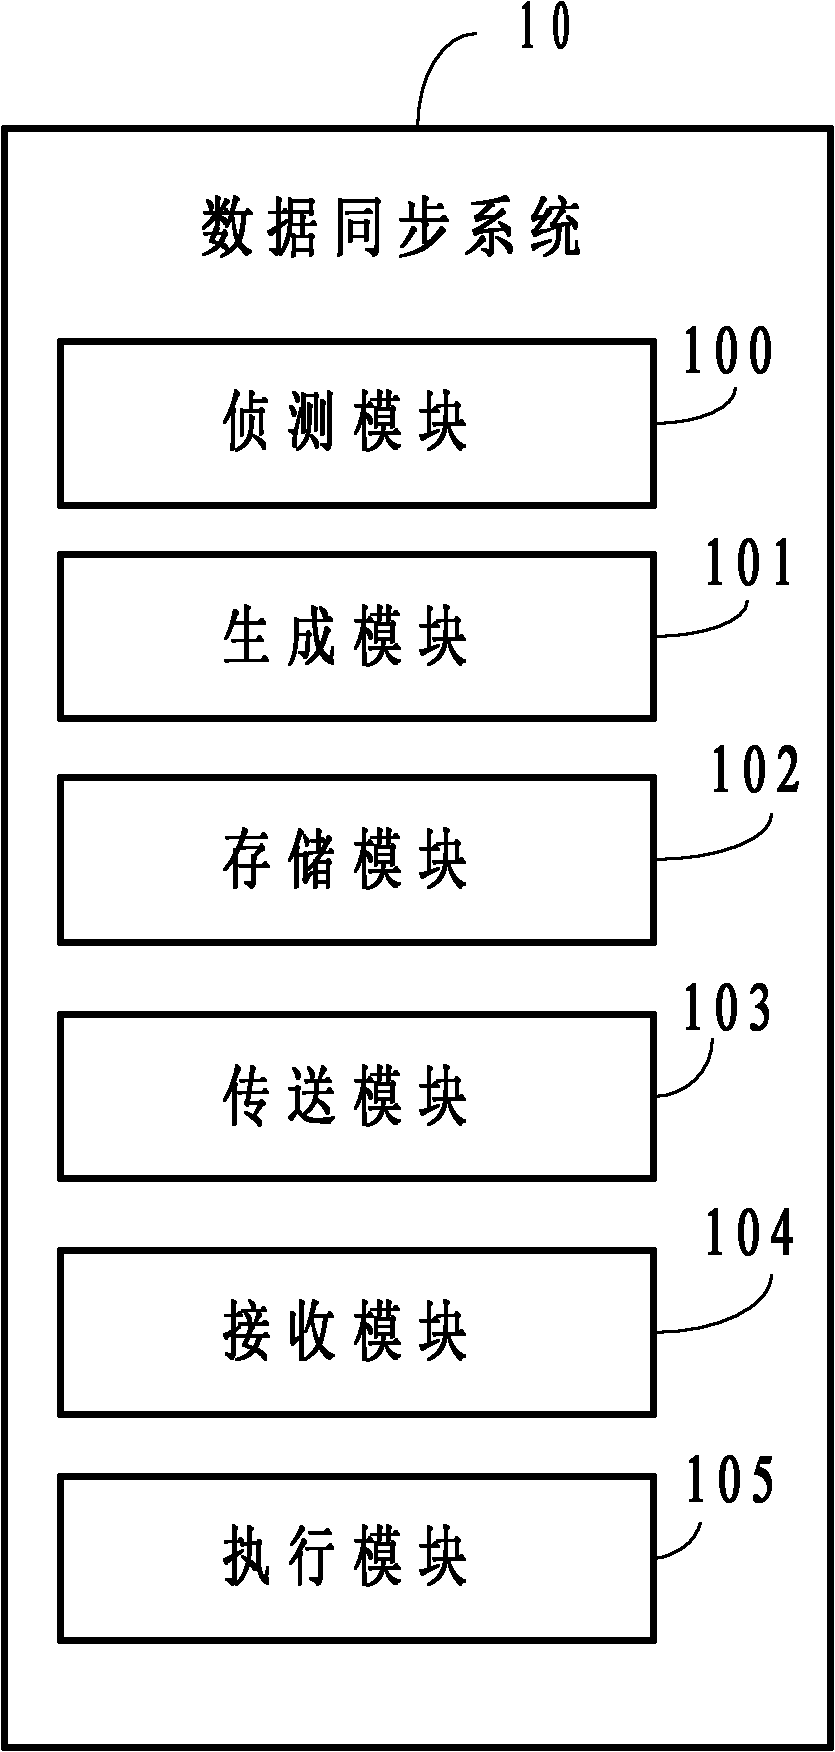 Data synchronism system and method